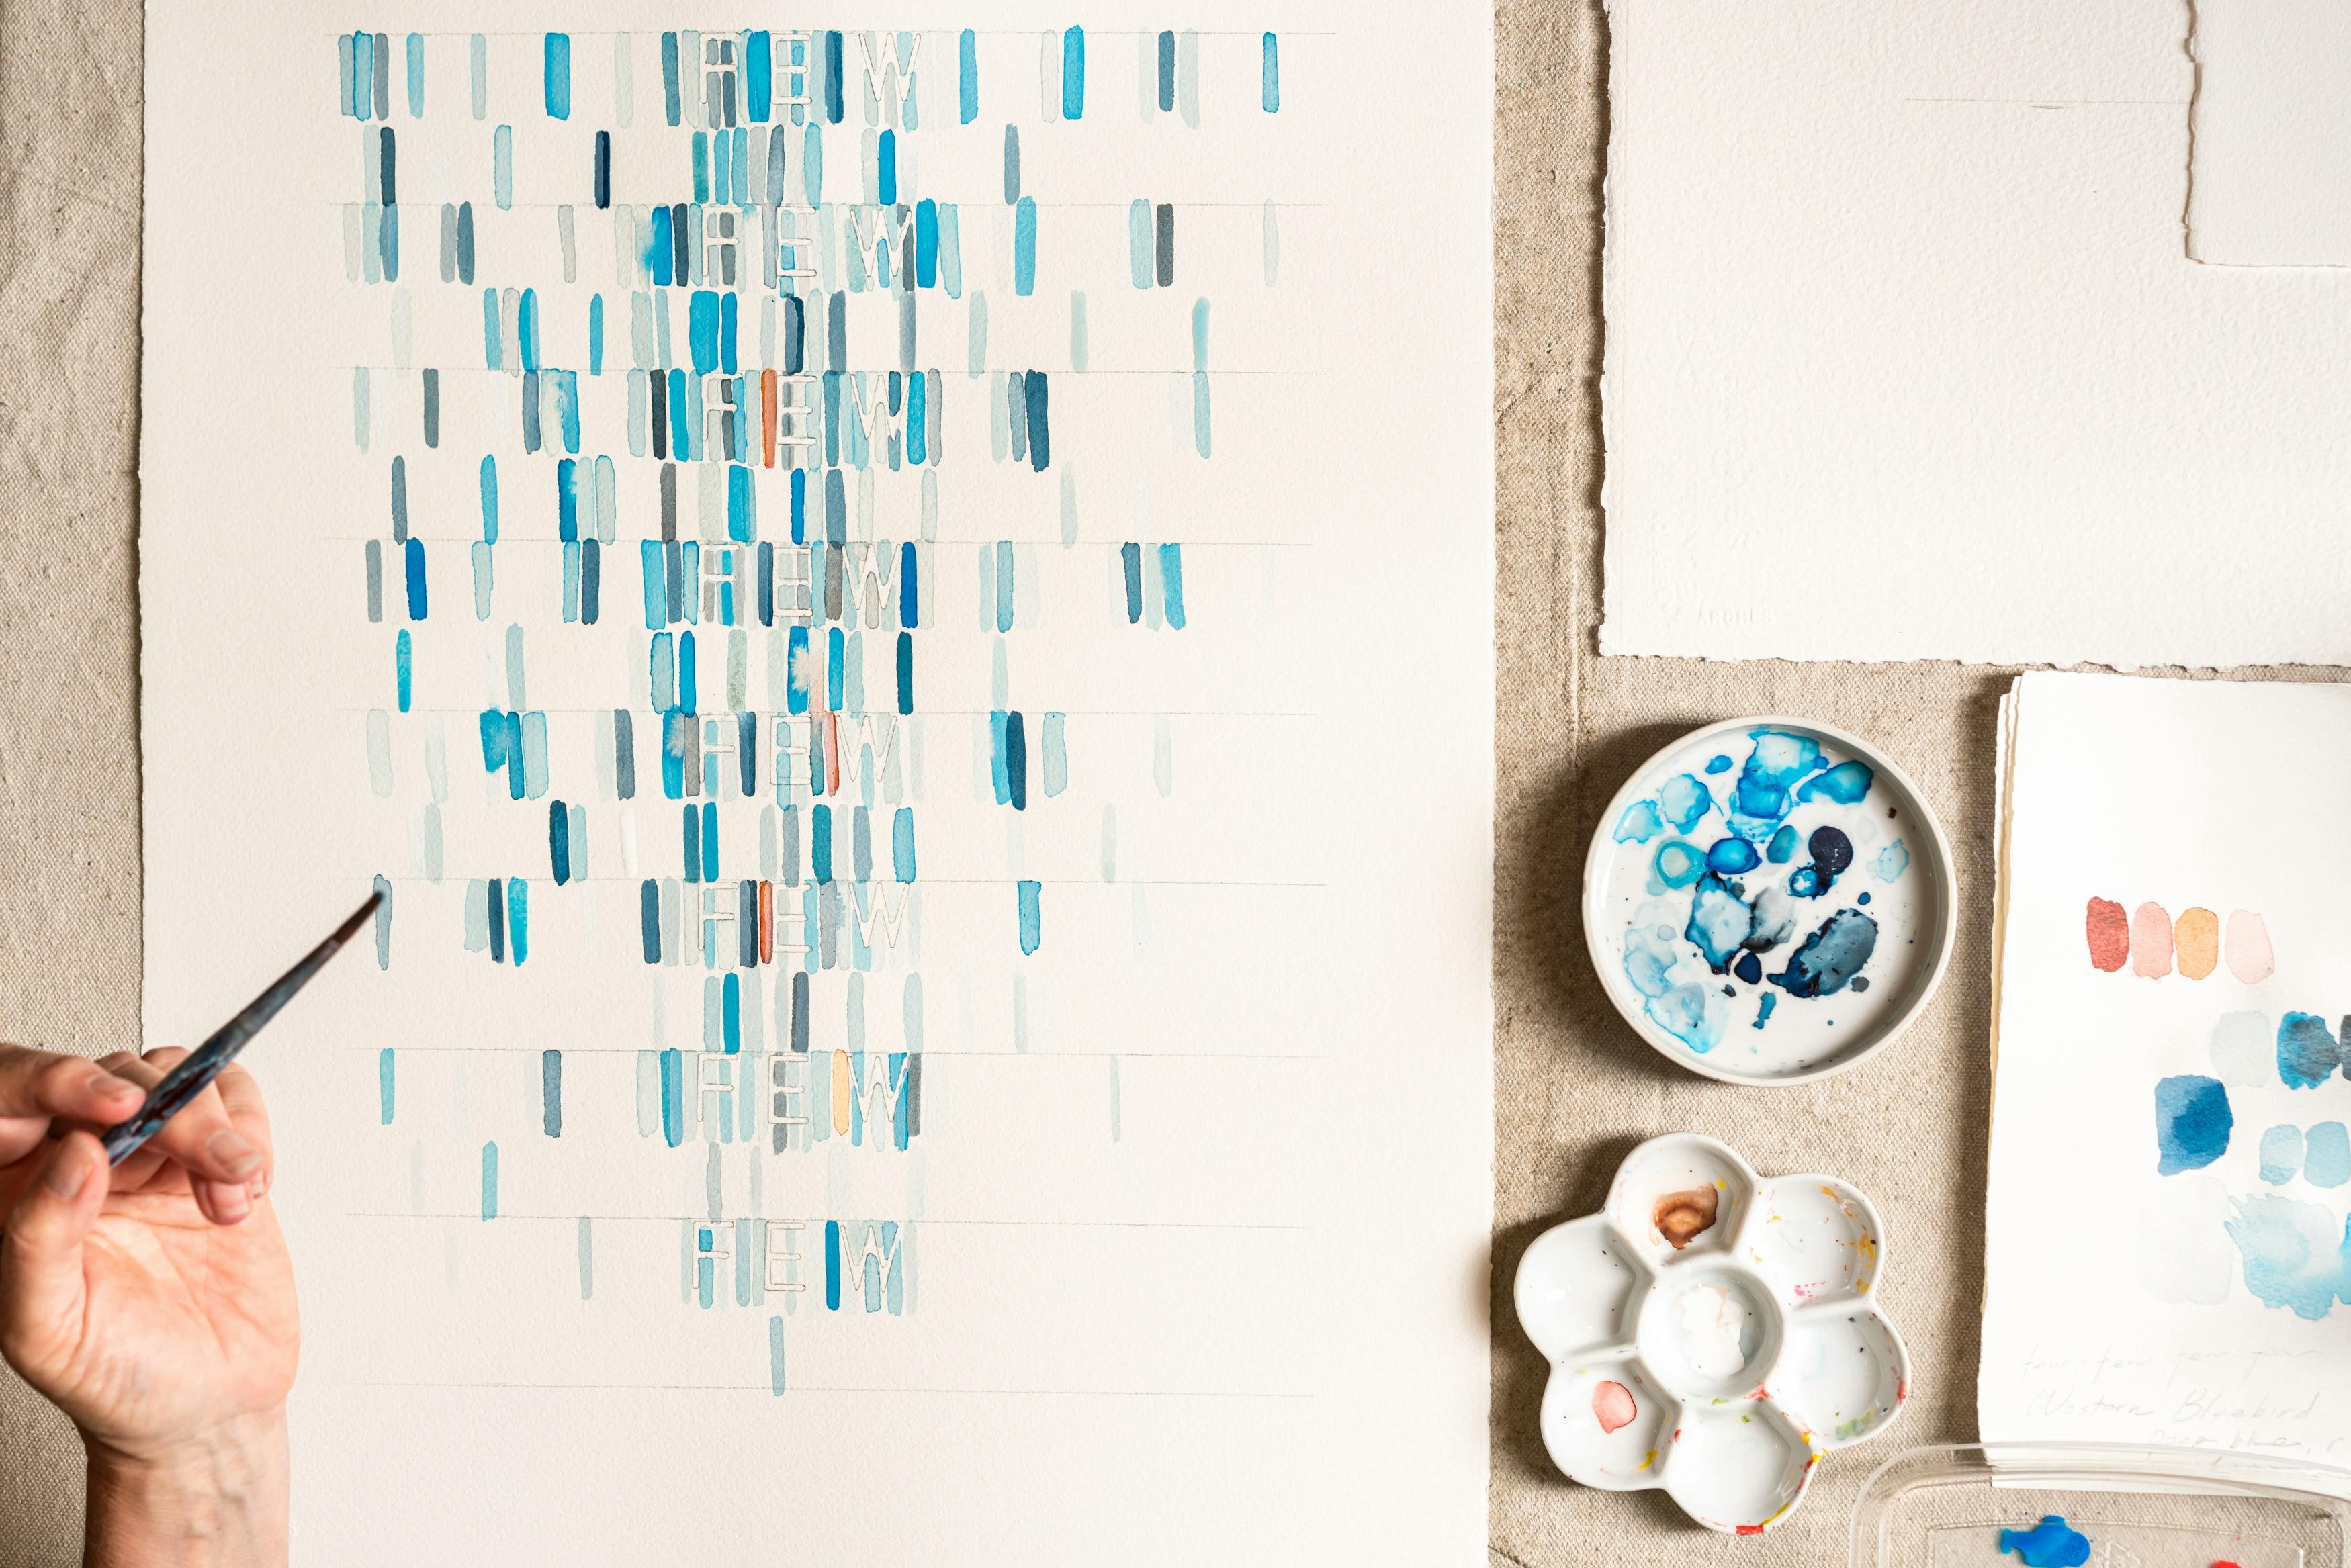 A blue, in-progress painting by artist Gail Tarantino with concealed lines of text.